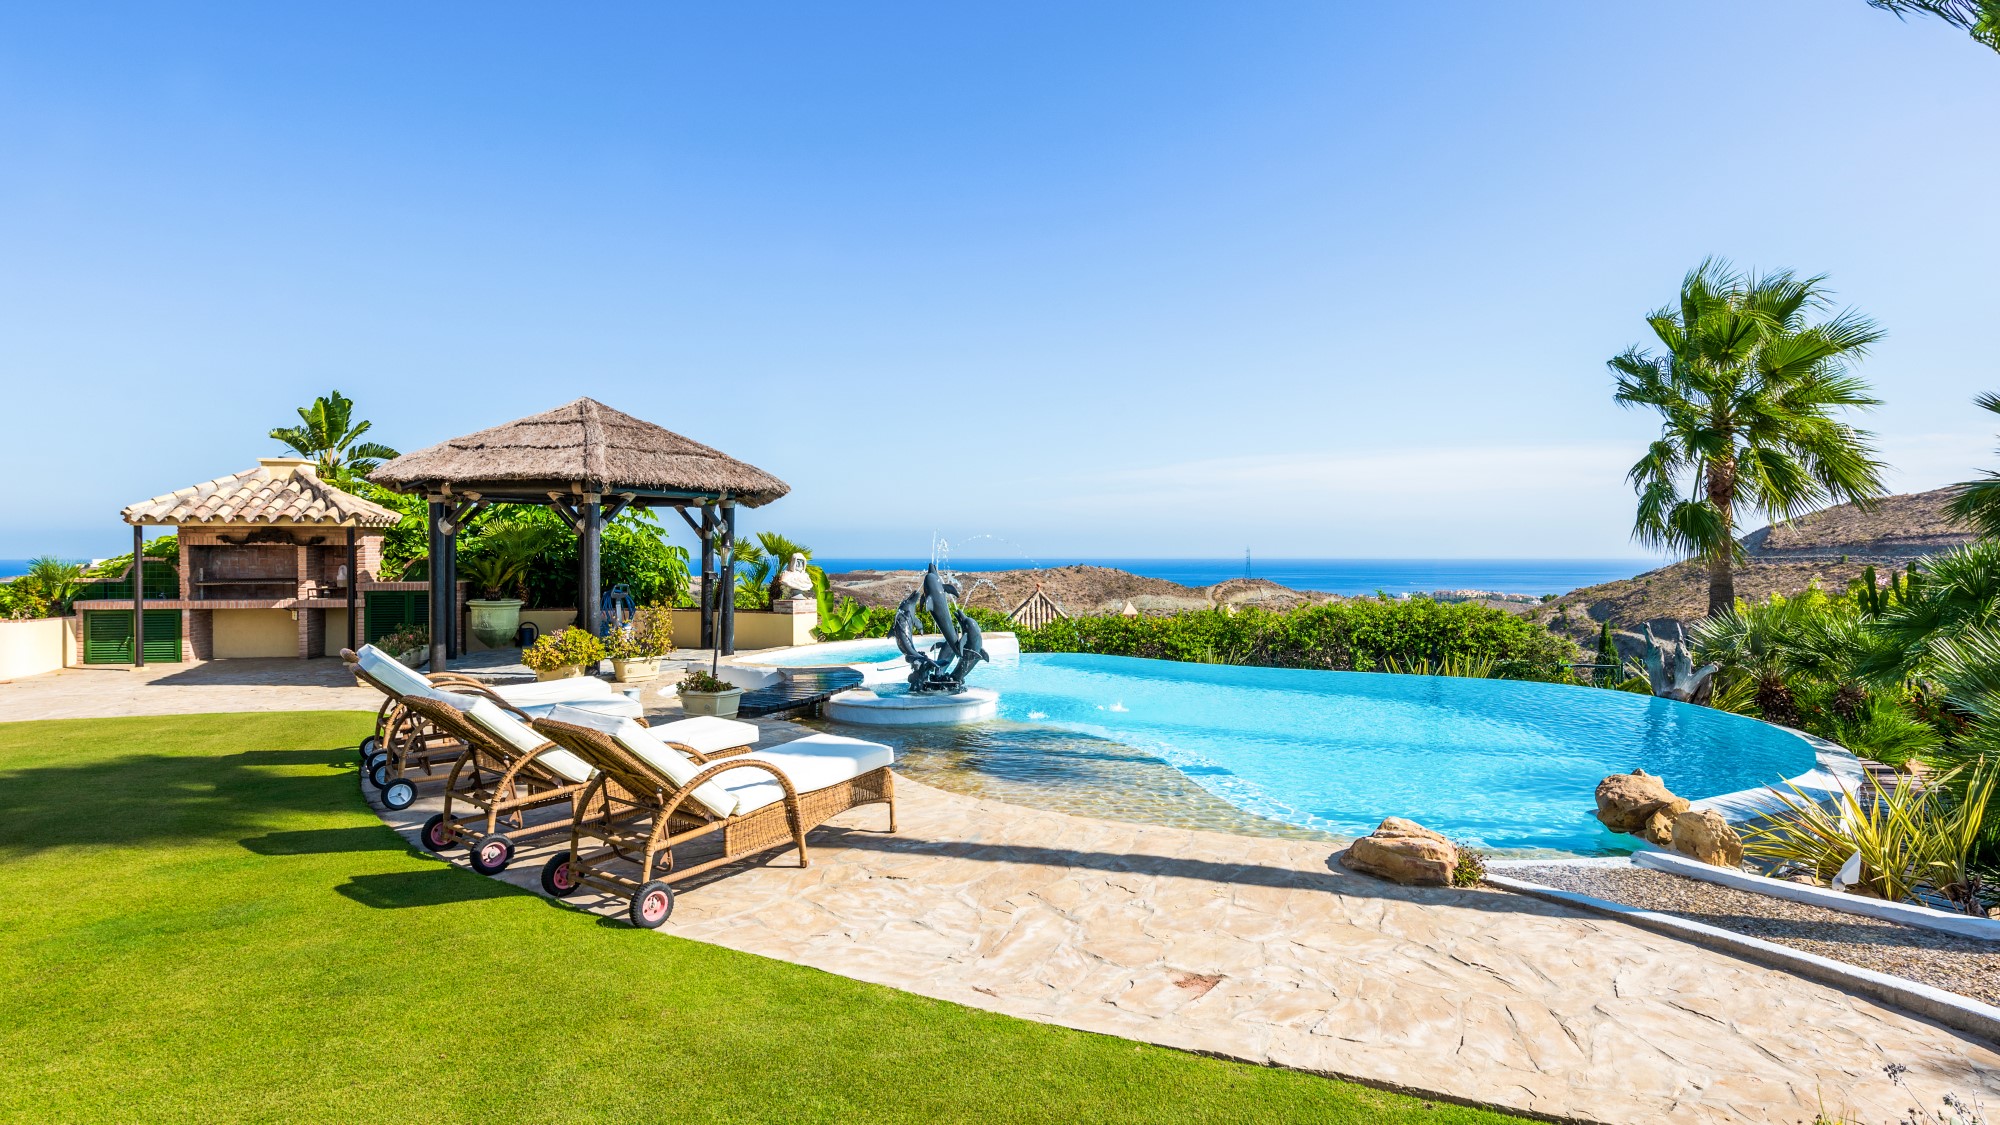 2020 expected to be a good year for Marbella luxury real estate